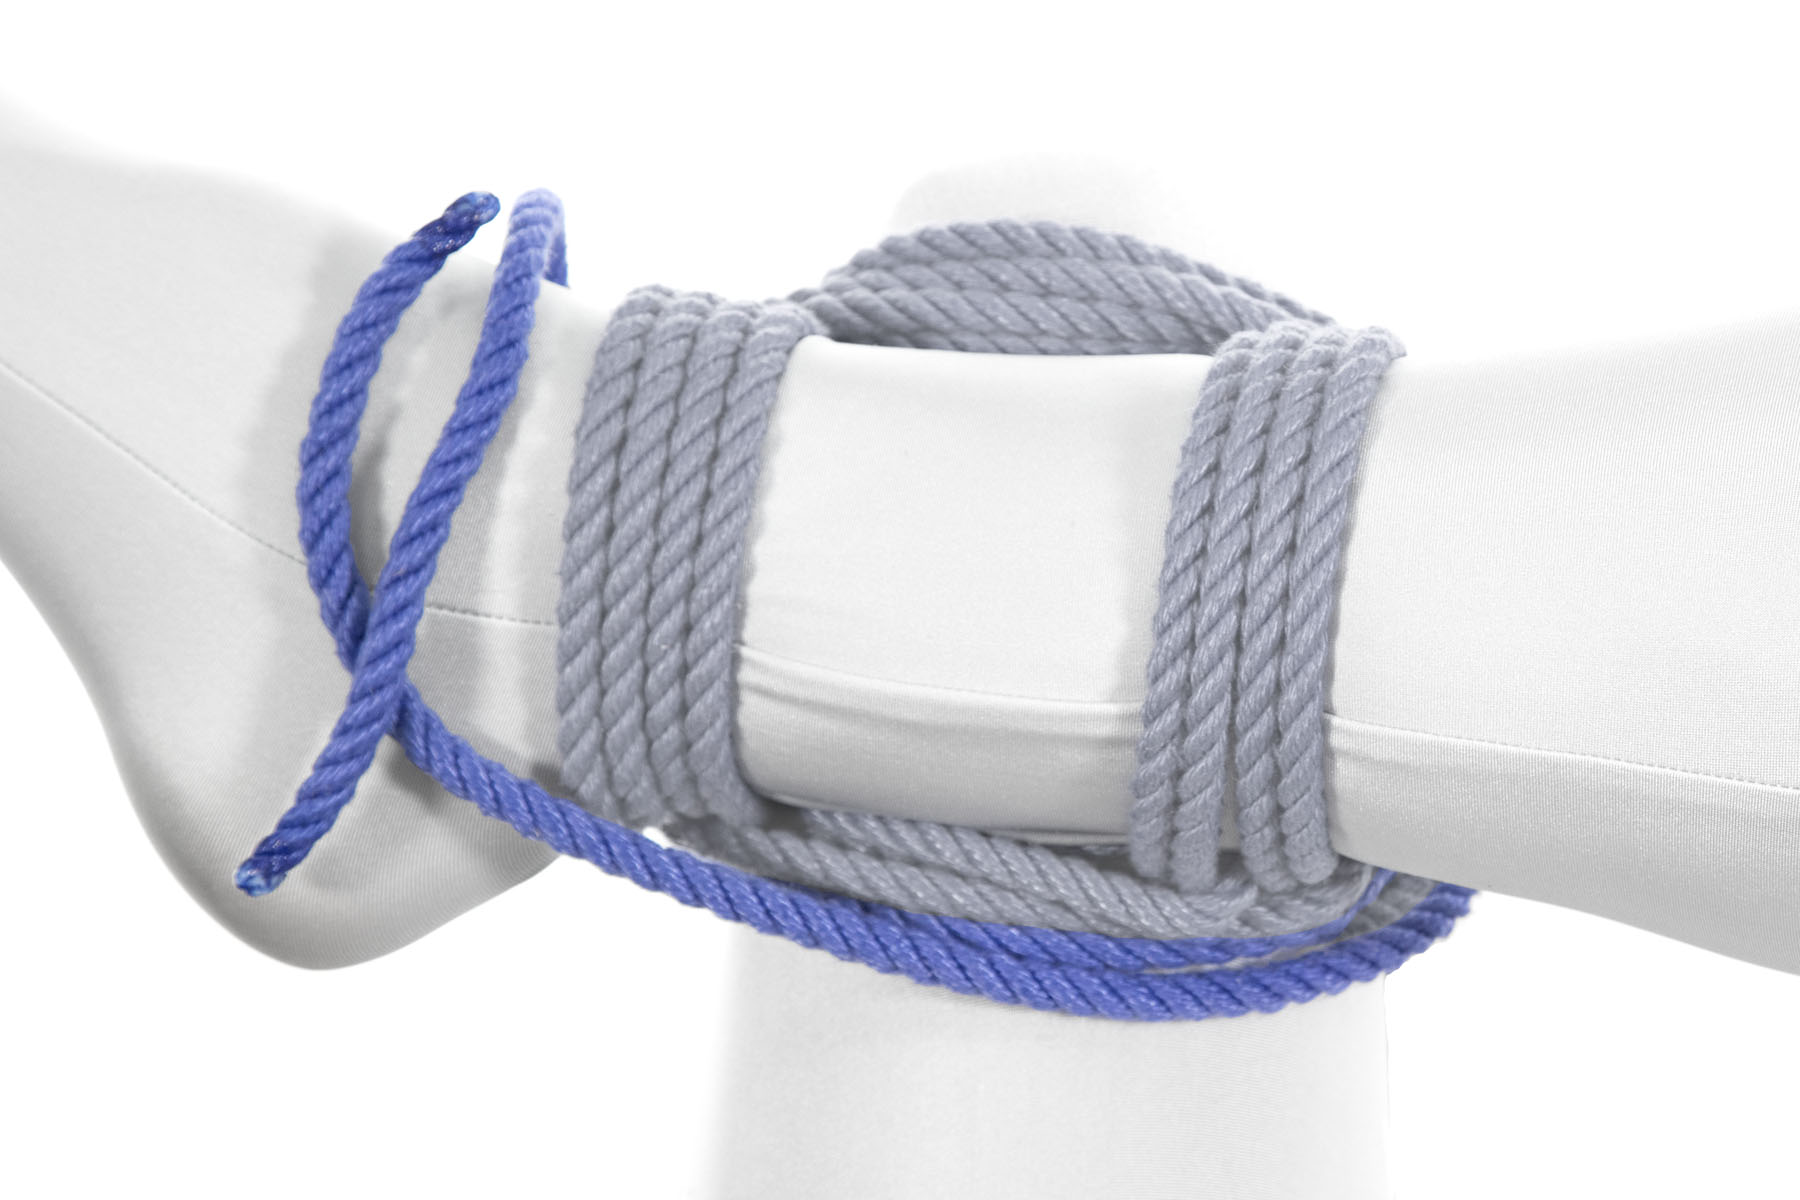 The ends of the rope have been split in preparation for tying a square knot. One end goes diagonally up and over the right ankle, lying on top of it. The other end continues to follow the sqaure, crossing to the left over the left leg and then moving away from the body under the right ankle. It then wraps up around the ankle and meets the first end on top of the ankle.